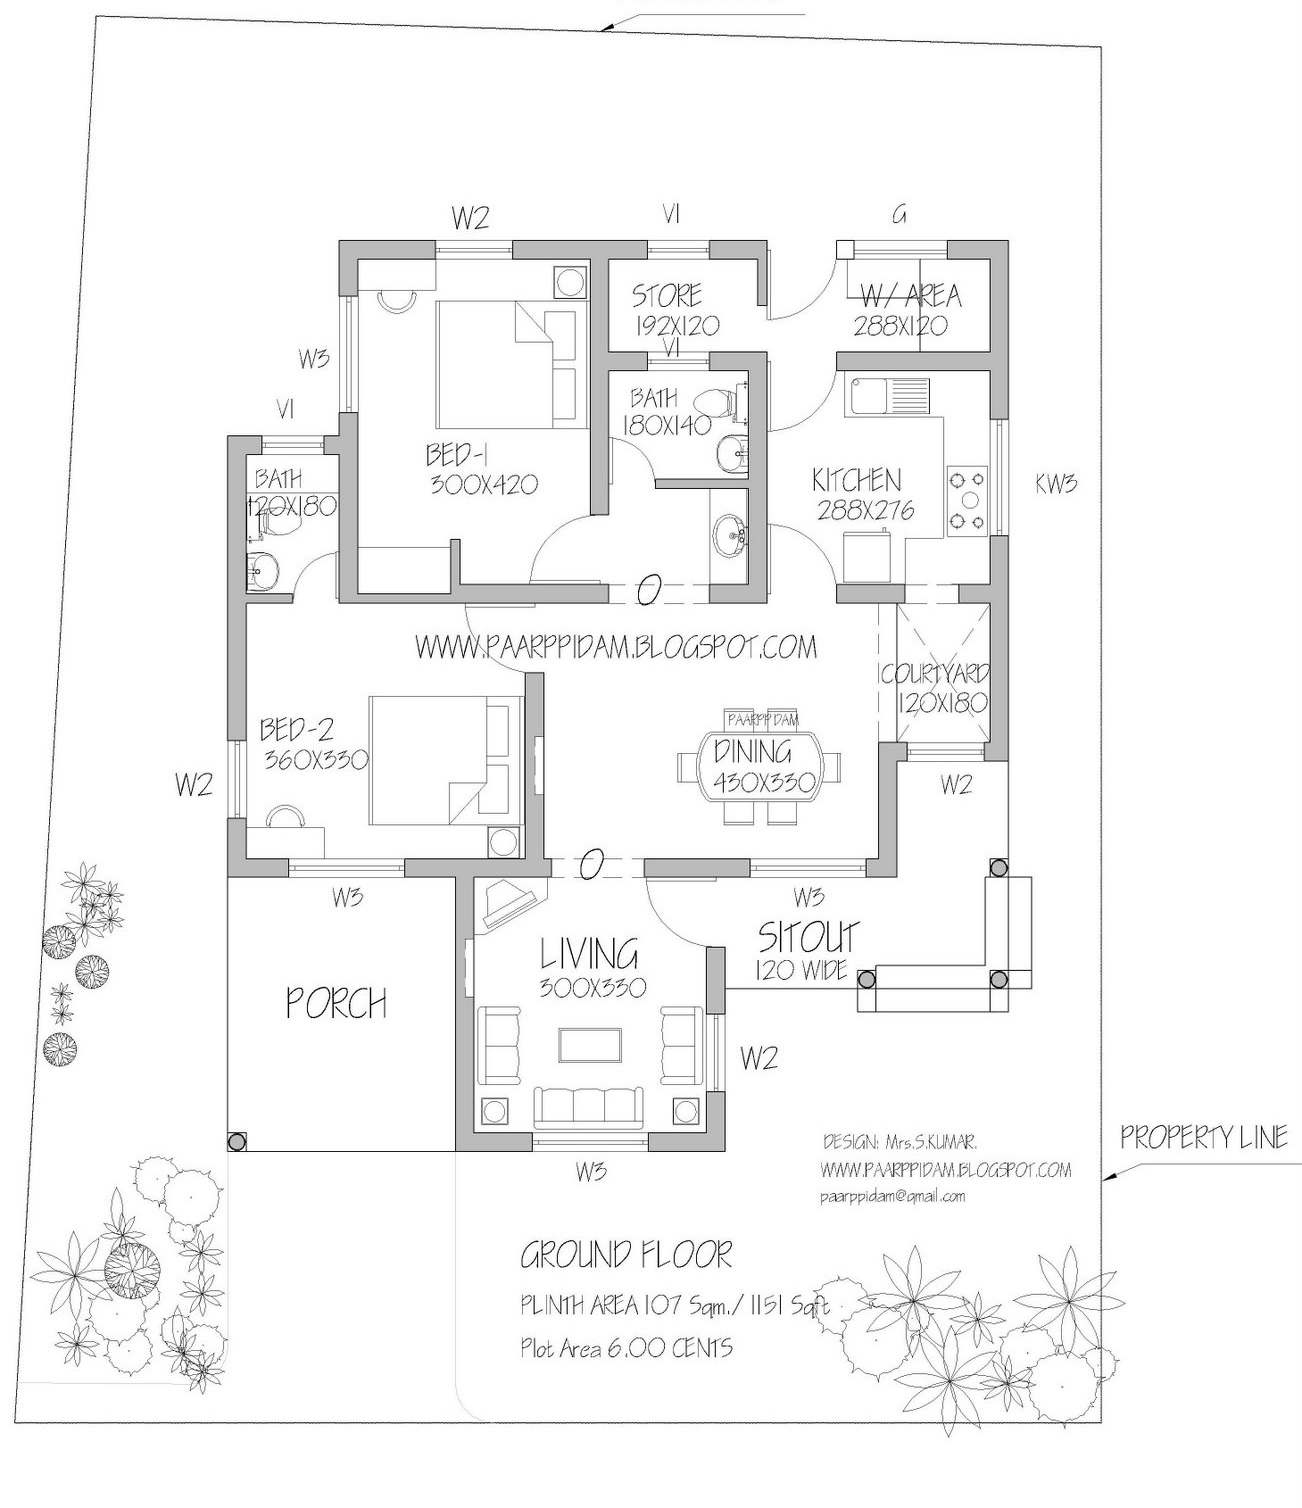 Low Budget 2 Bedroom Home Plan With 1151 Square Feet In 6 Cent Plot Free Kerala Home Plans